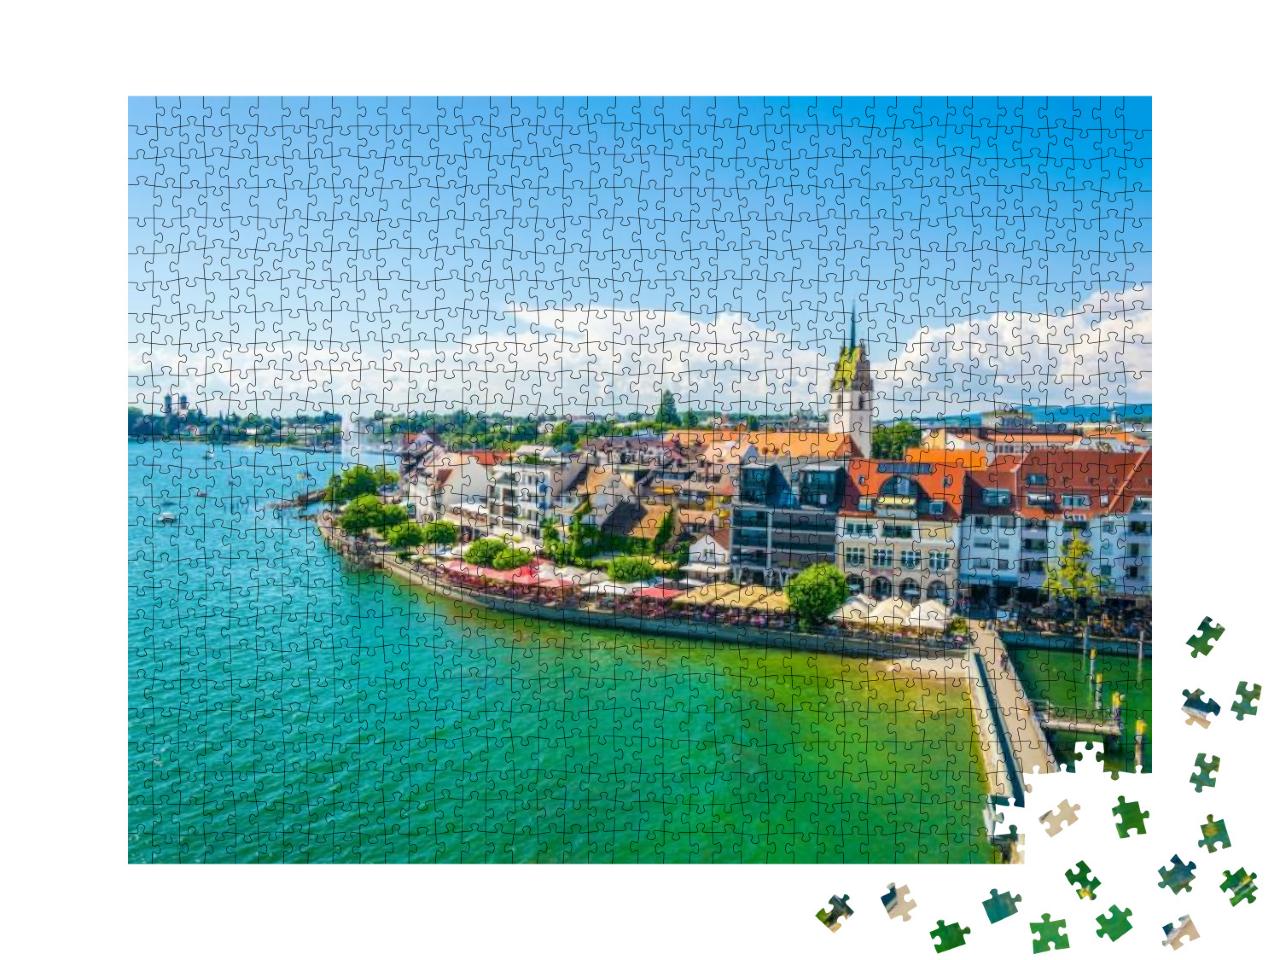 Panorama View of a Marina of the German City Friedrichsha... Jigsaw Puzzle with 1000 pieces